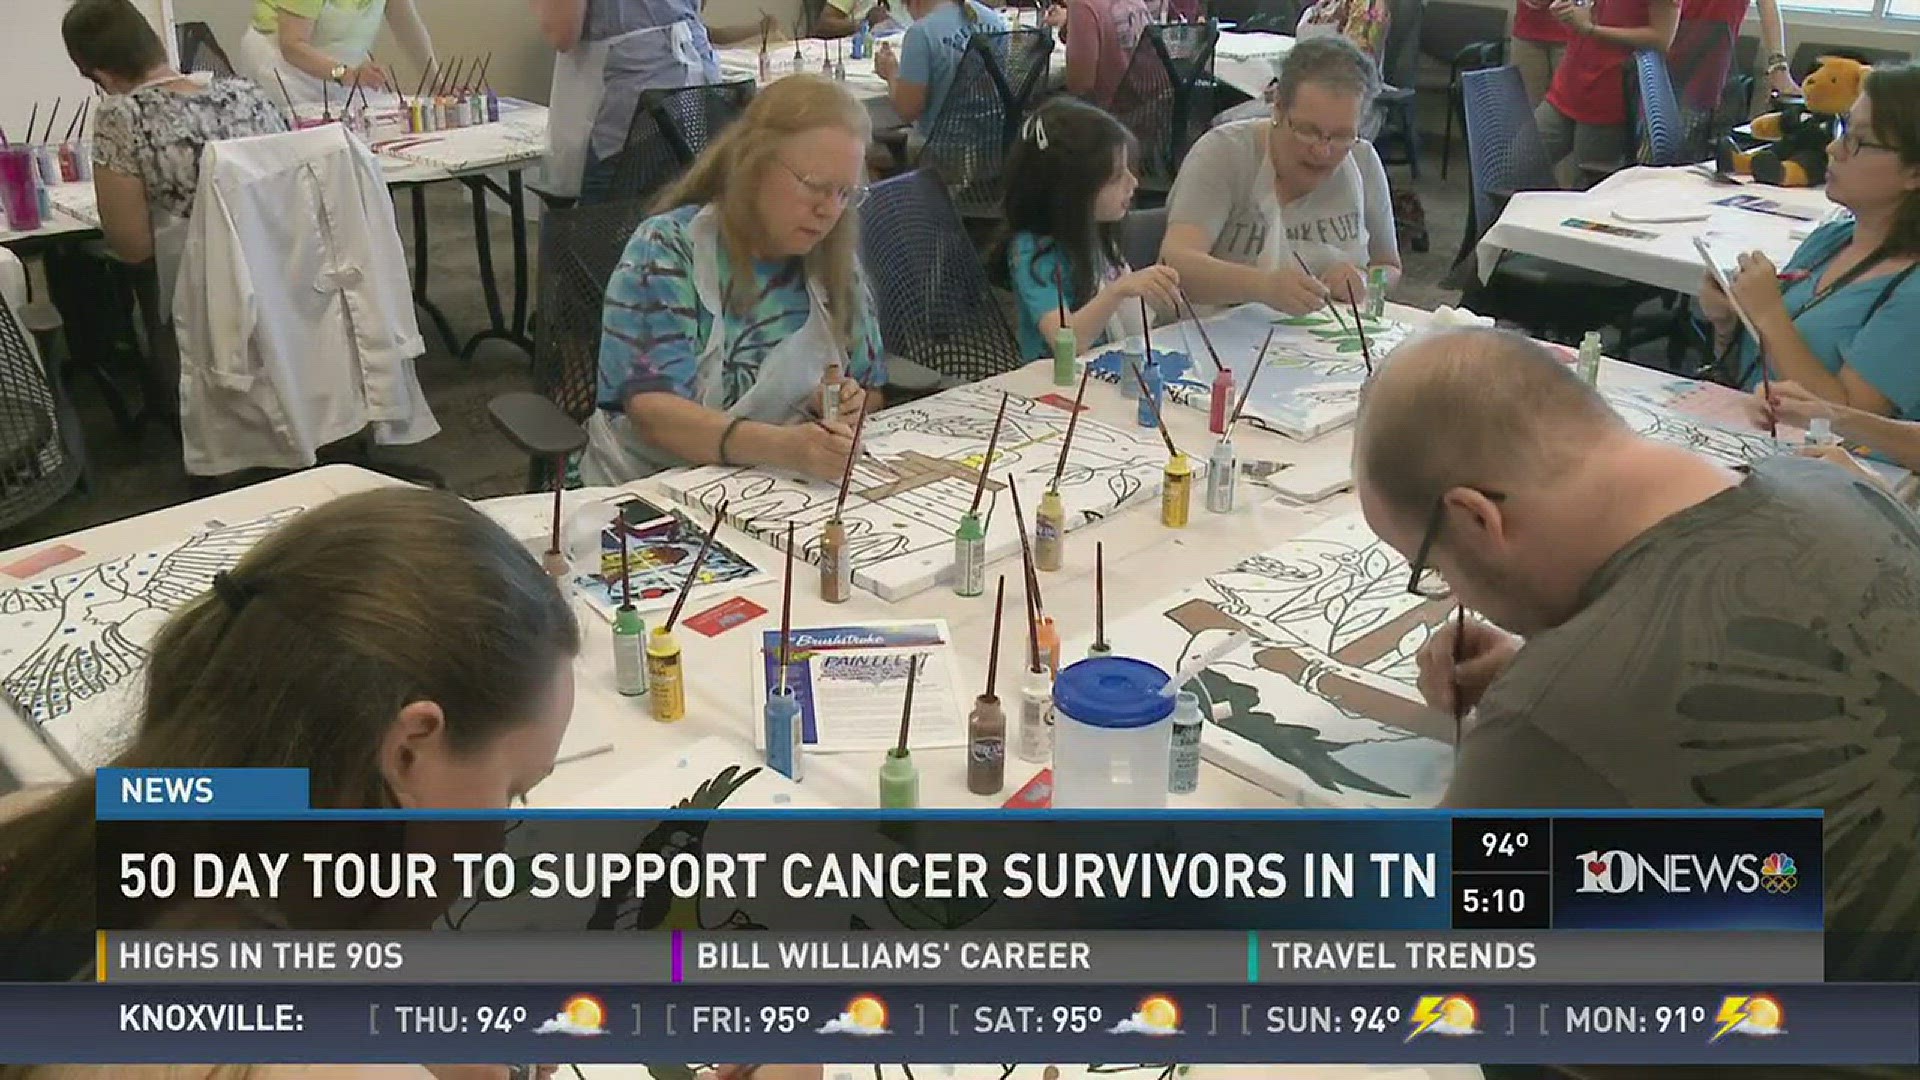 Cancer patients, survivors, and hospital staff came together to paint for healing at the PaintFest America event at UT Medical Center. July 20, 2016.